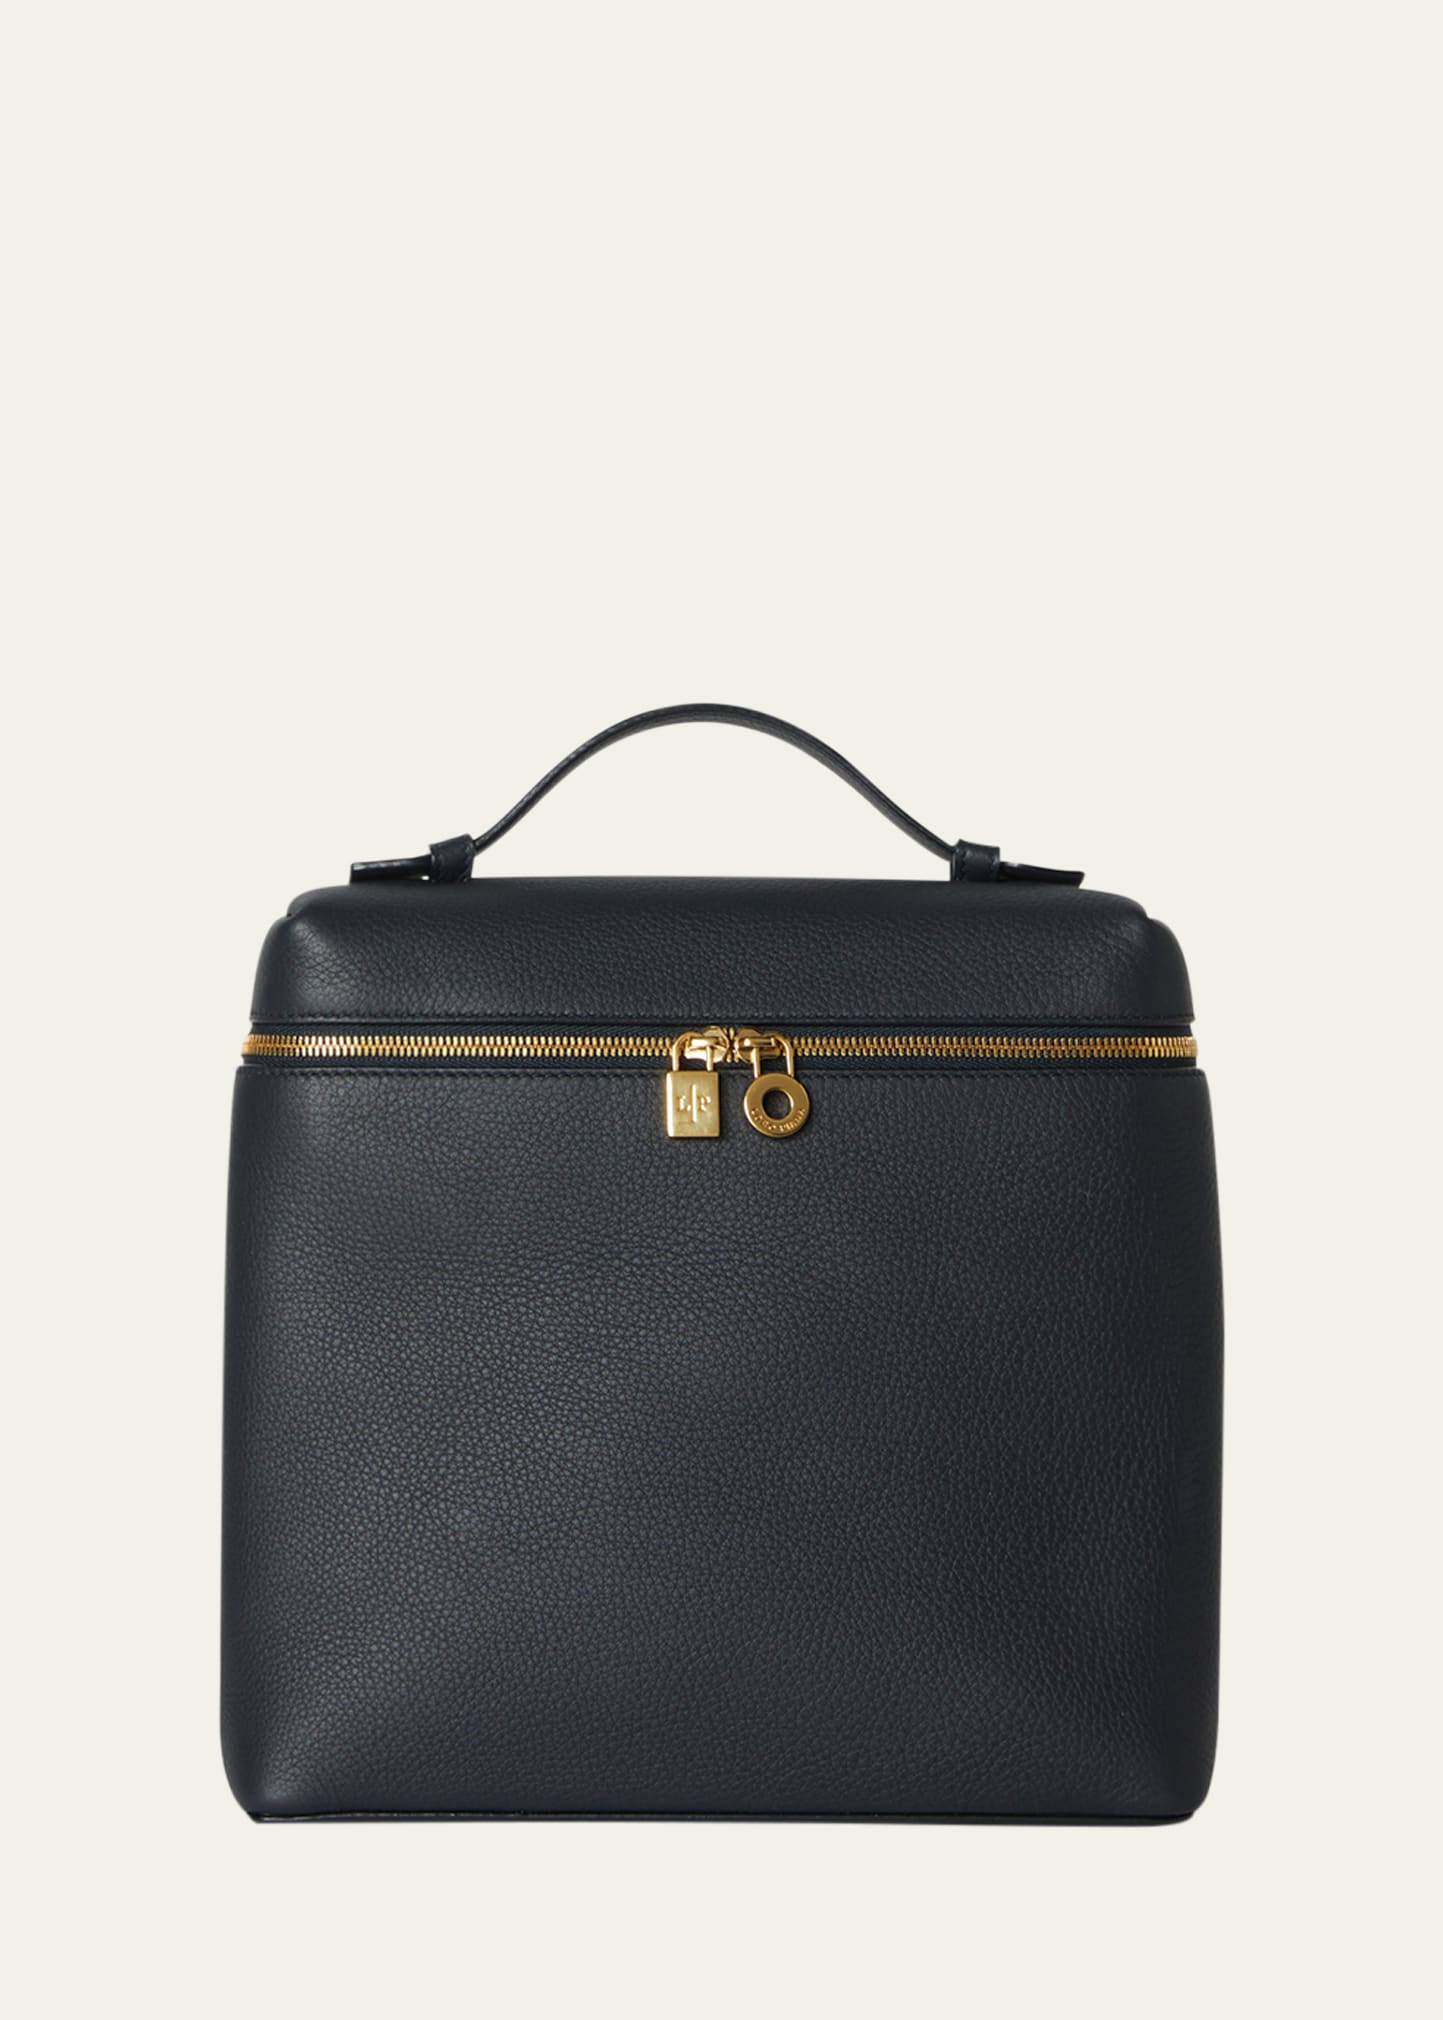 The iconic Loro Piana Extra Pocket in the backpack silhouette crafted